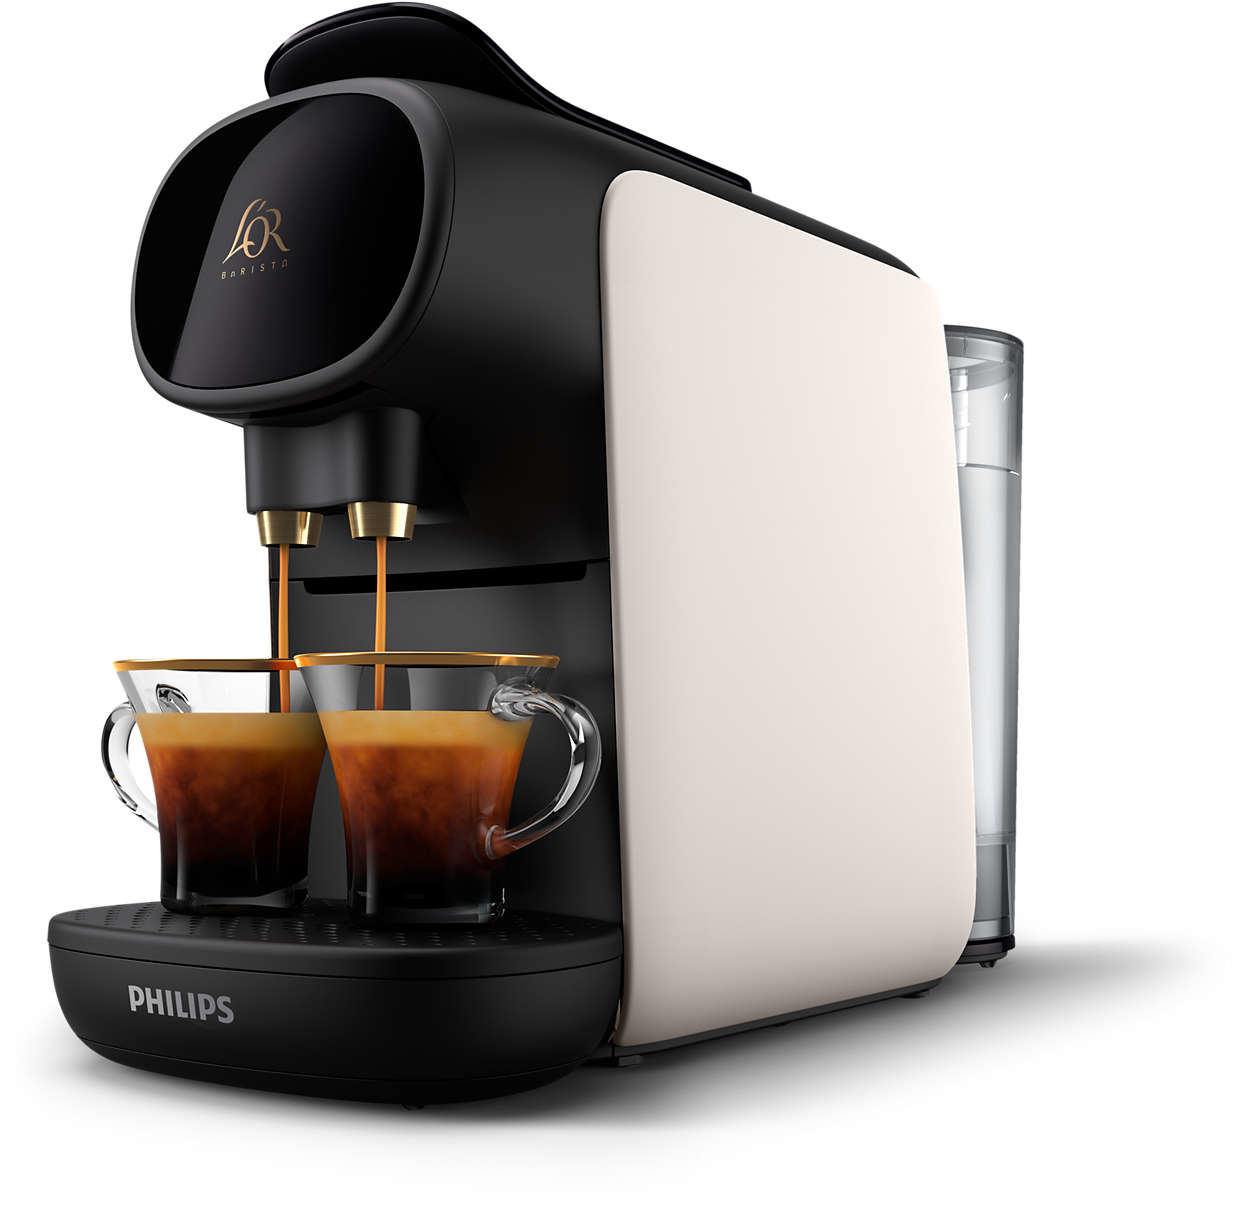 L’OR LM9012/00 coffee maker